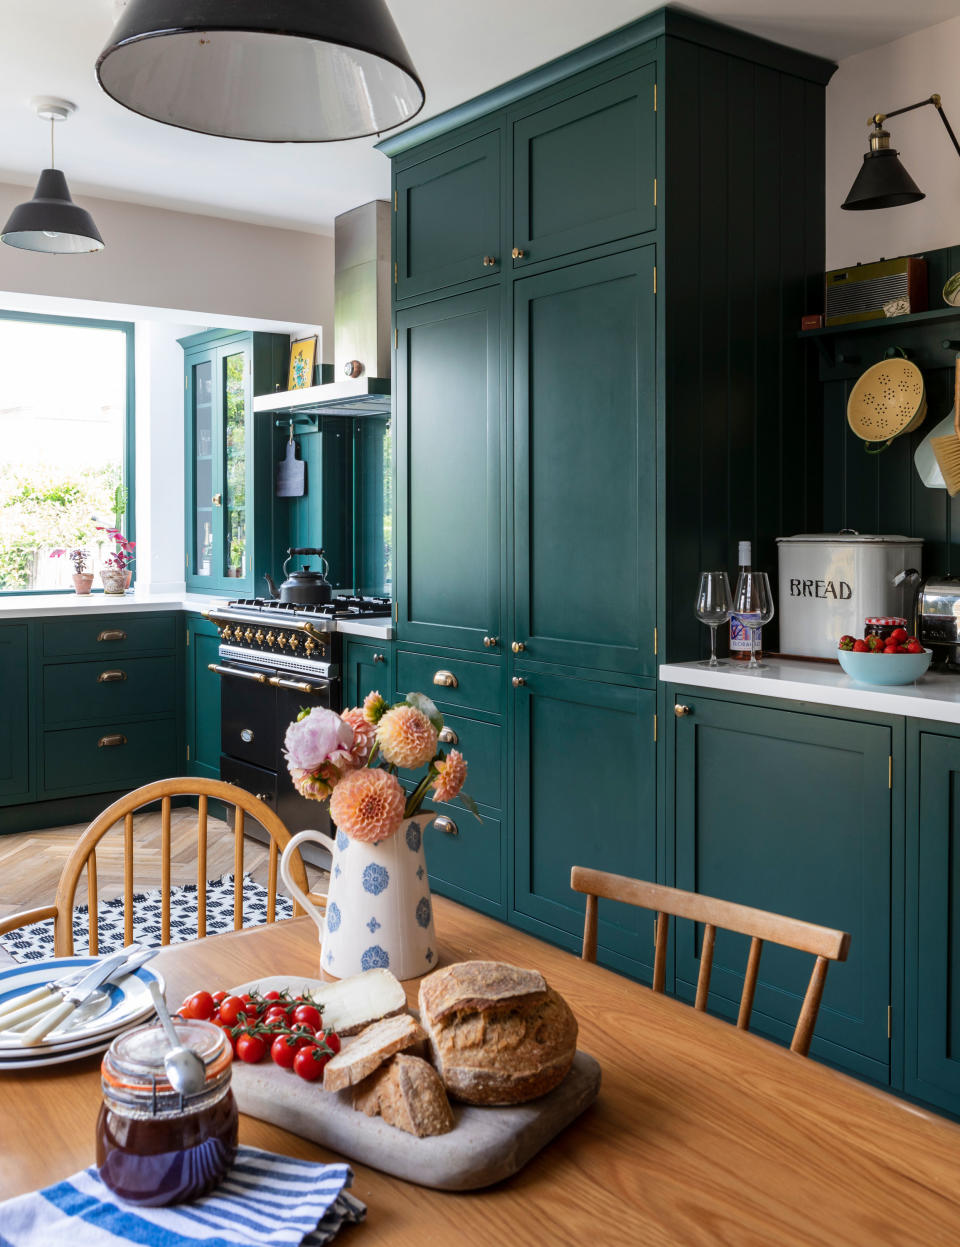 1. Paint your kitchen cabinets a pretty shade of emerald